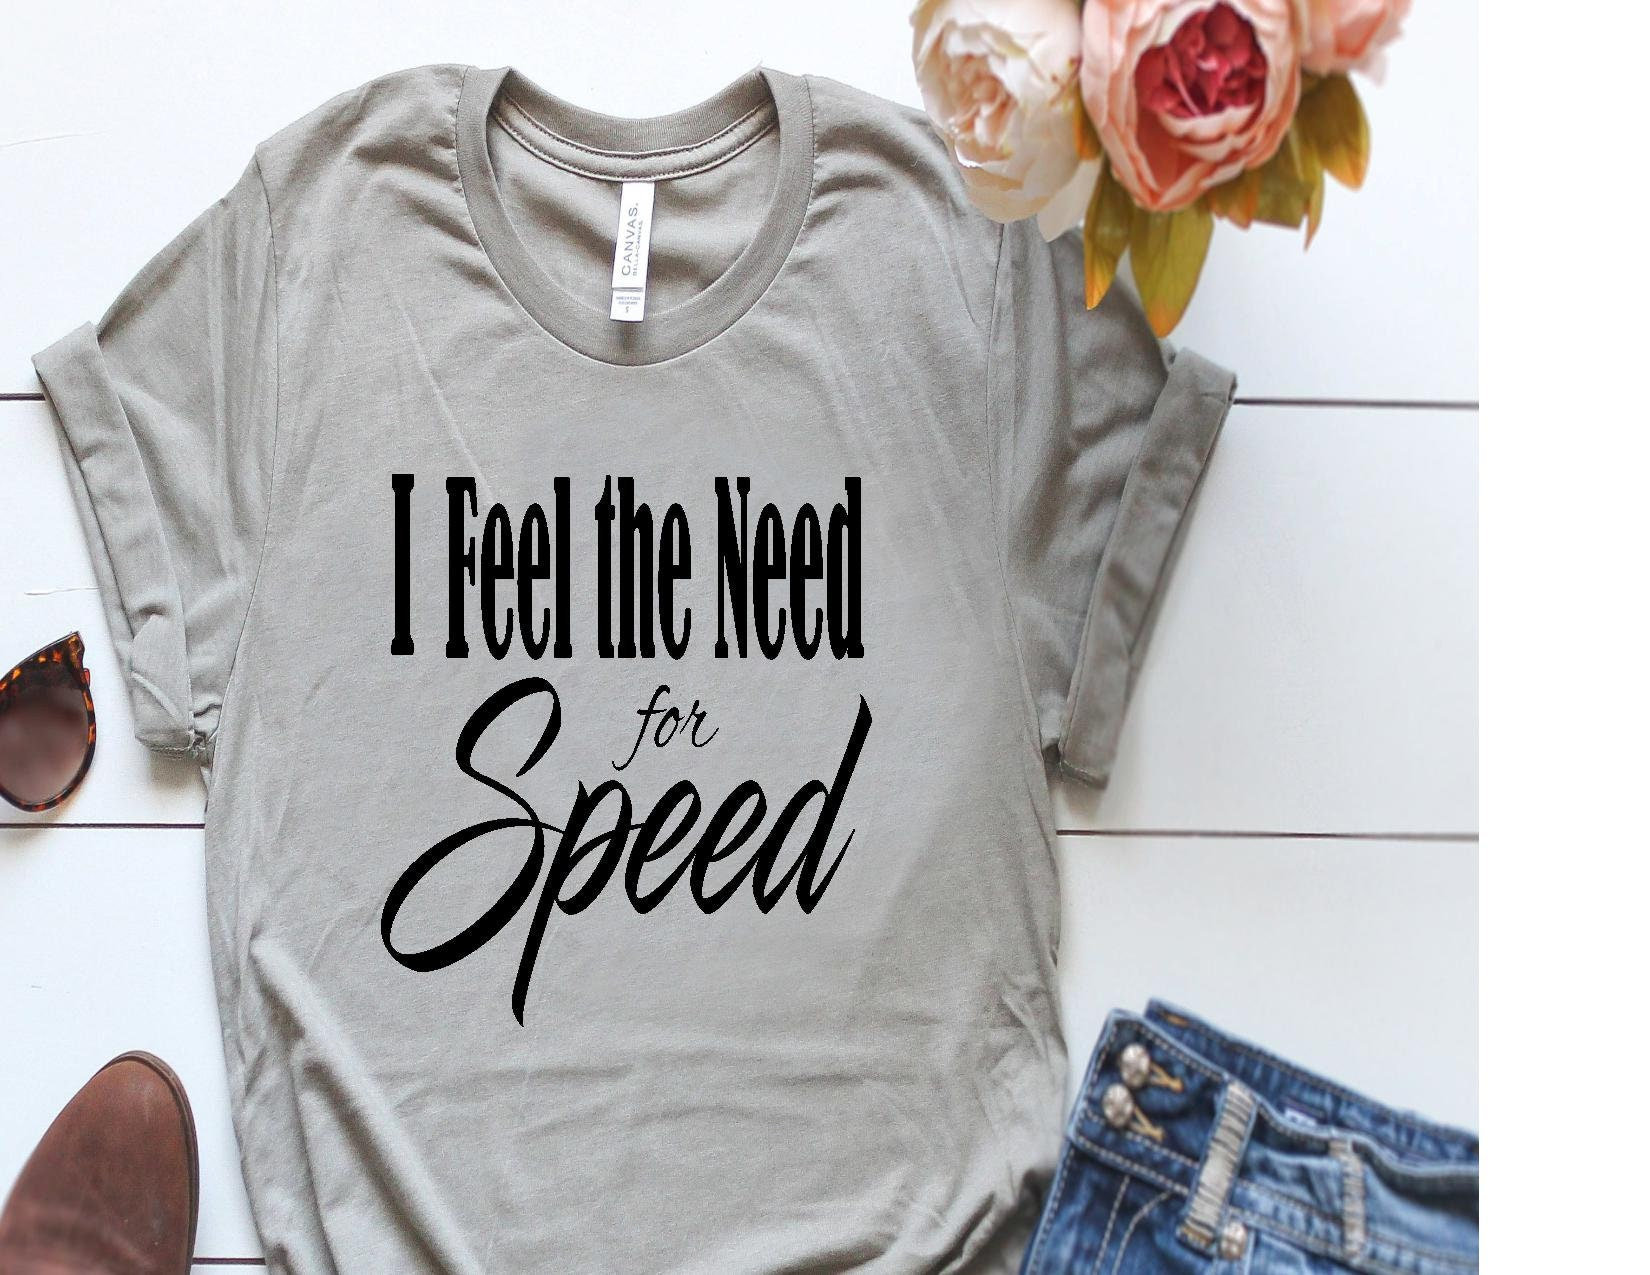 I Feel the Need.. The Need for Speed - Movies - T-Shirt